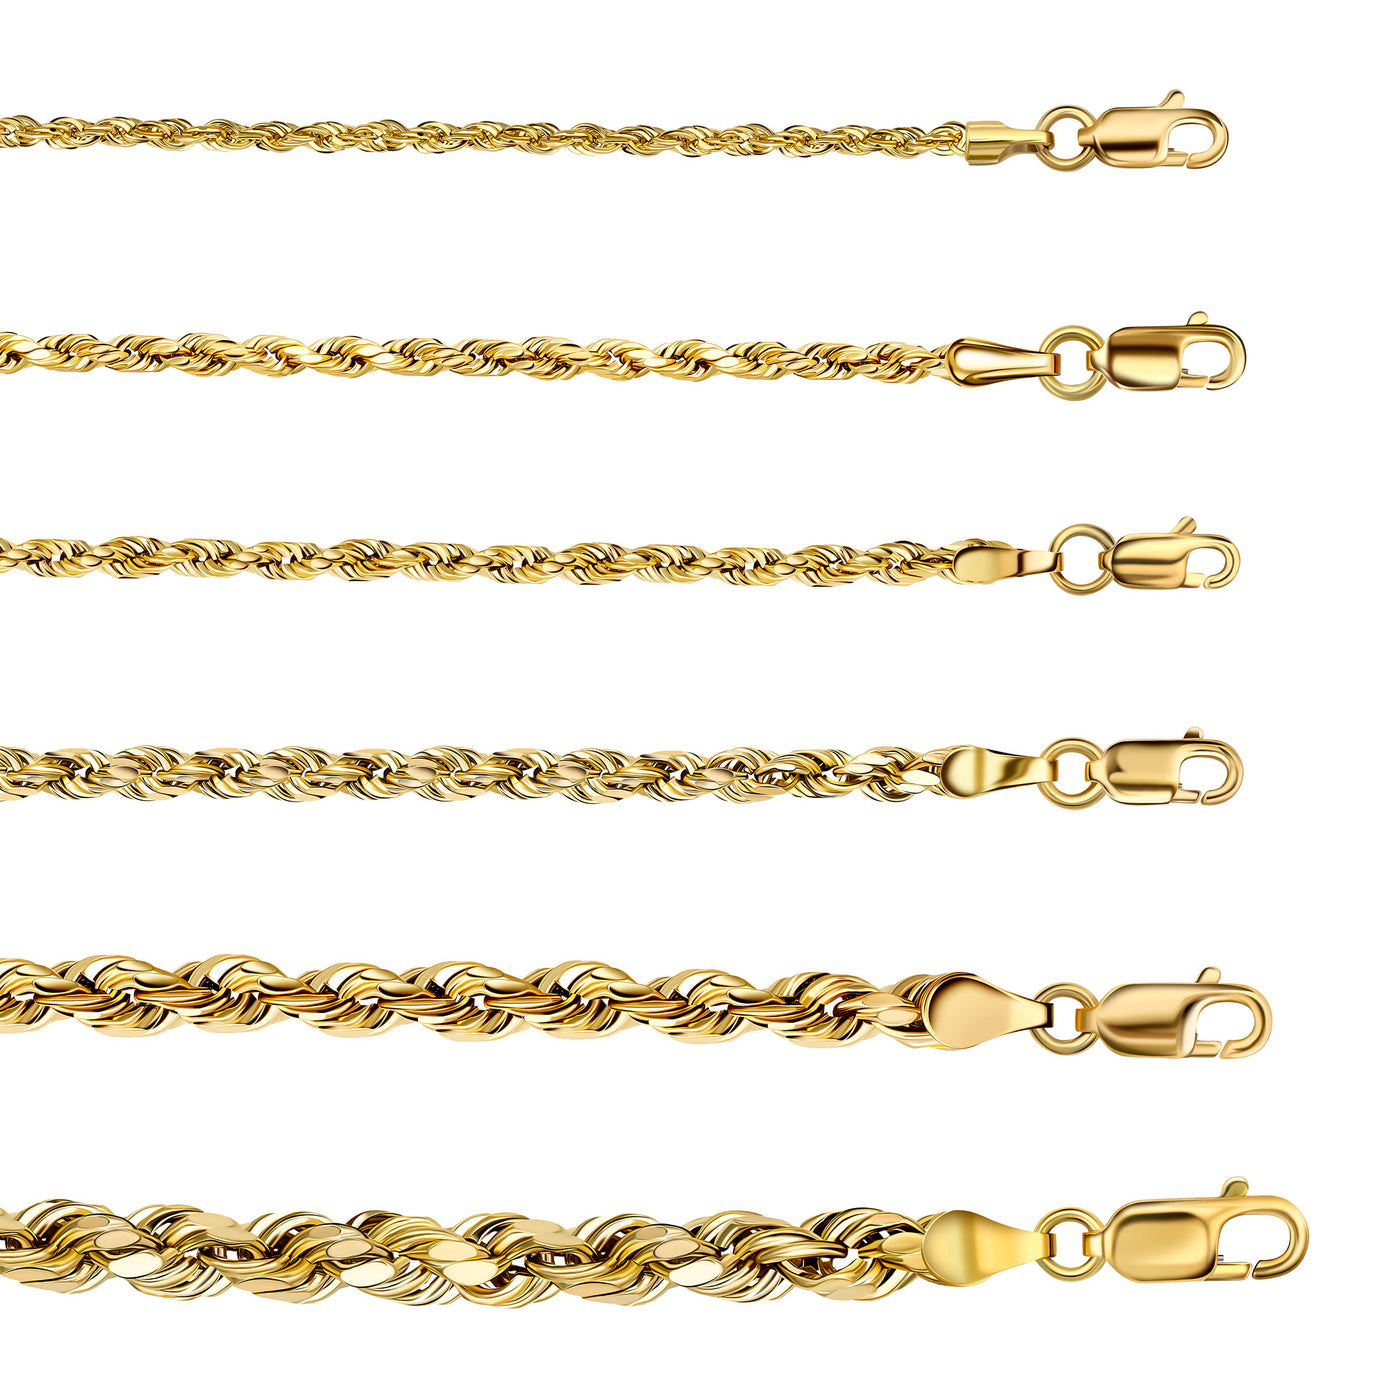 14K Gold Rope Chain Necklace